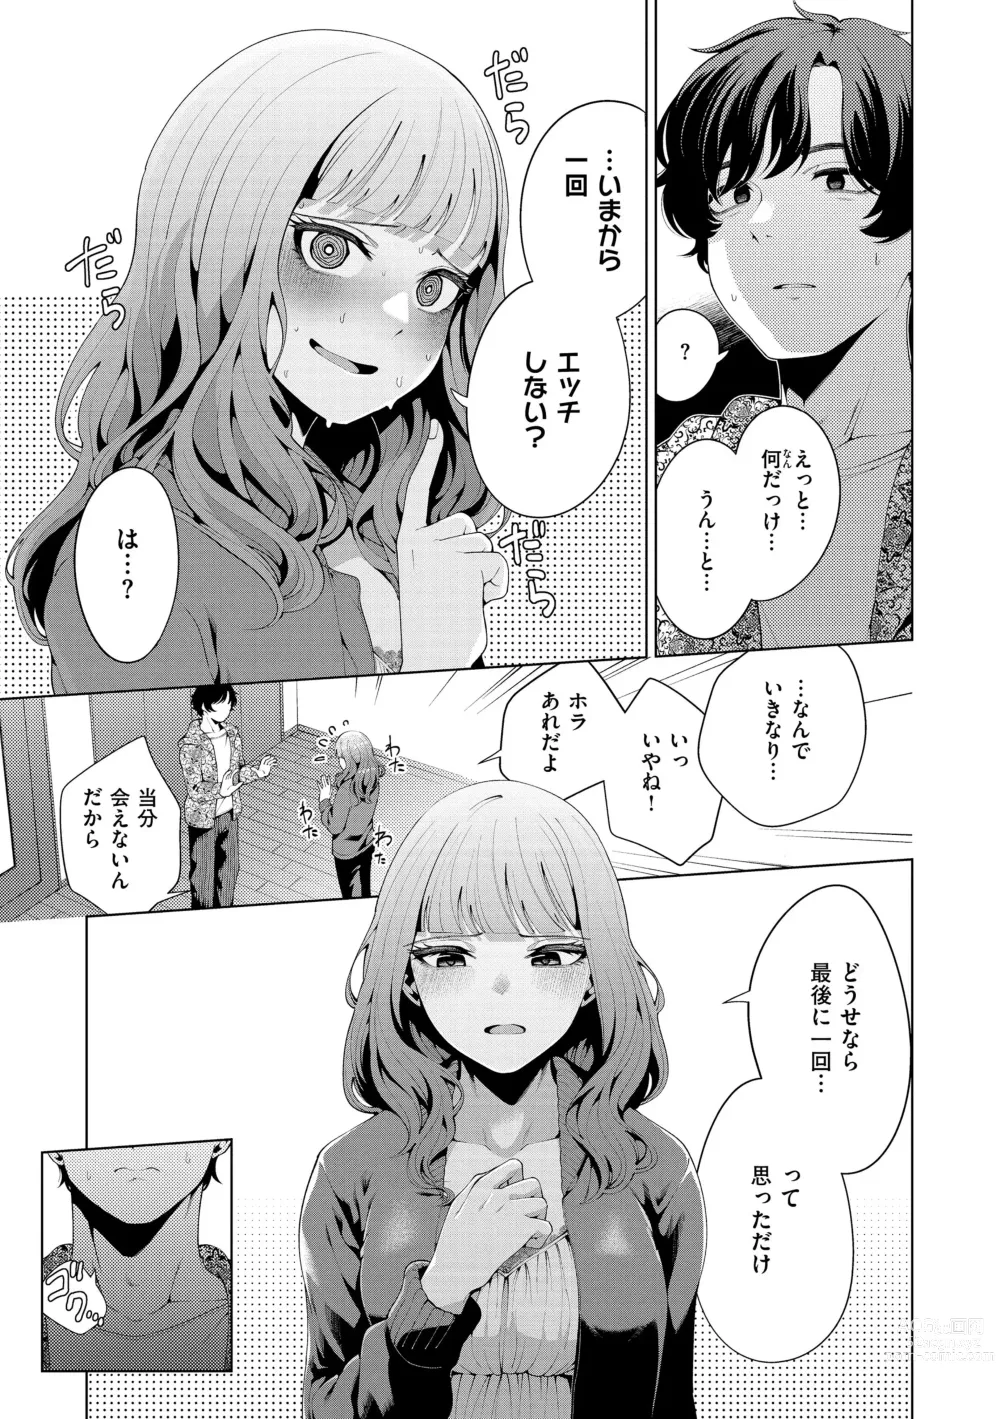 Page 13 of manga Watashi de Sometai - Dyed with Your Color.